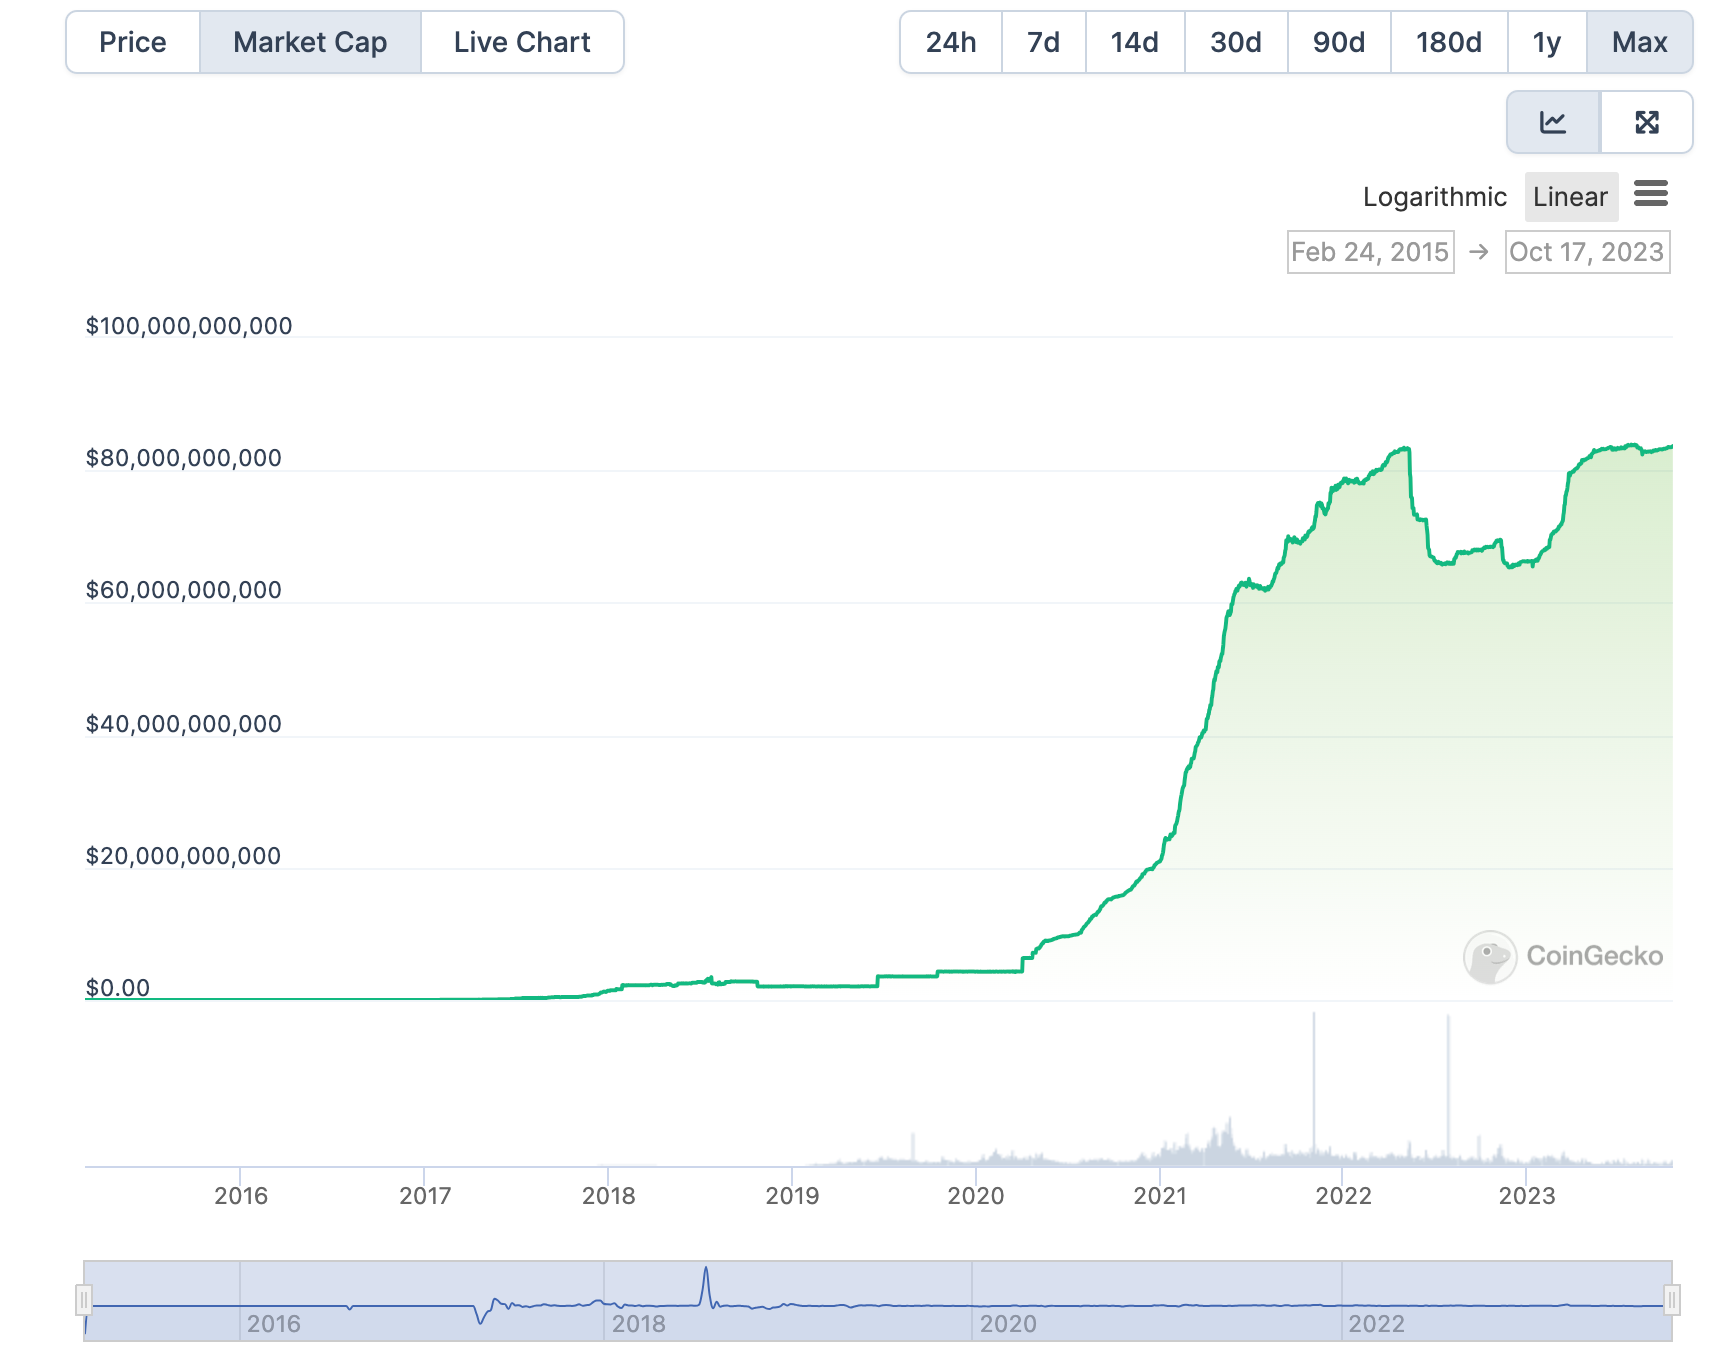 A graph of USDT’s market capitalization increasing over time.